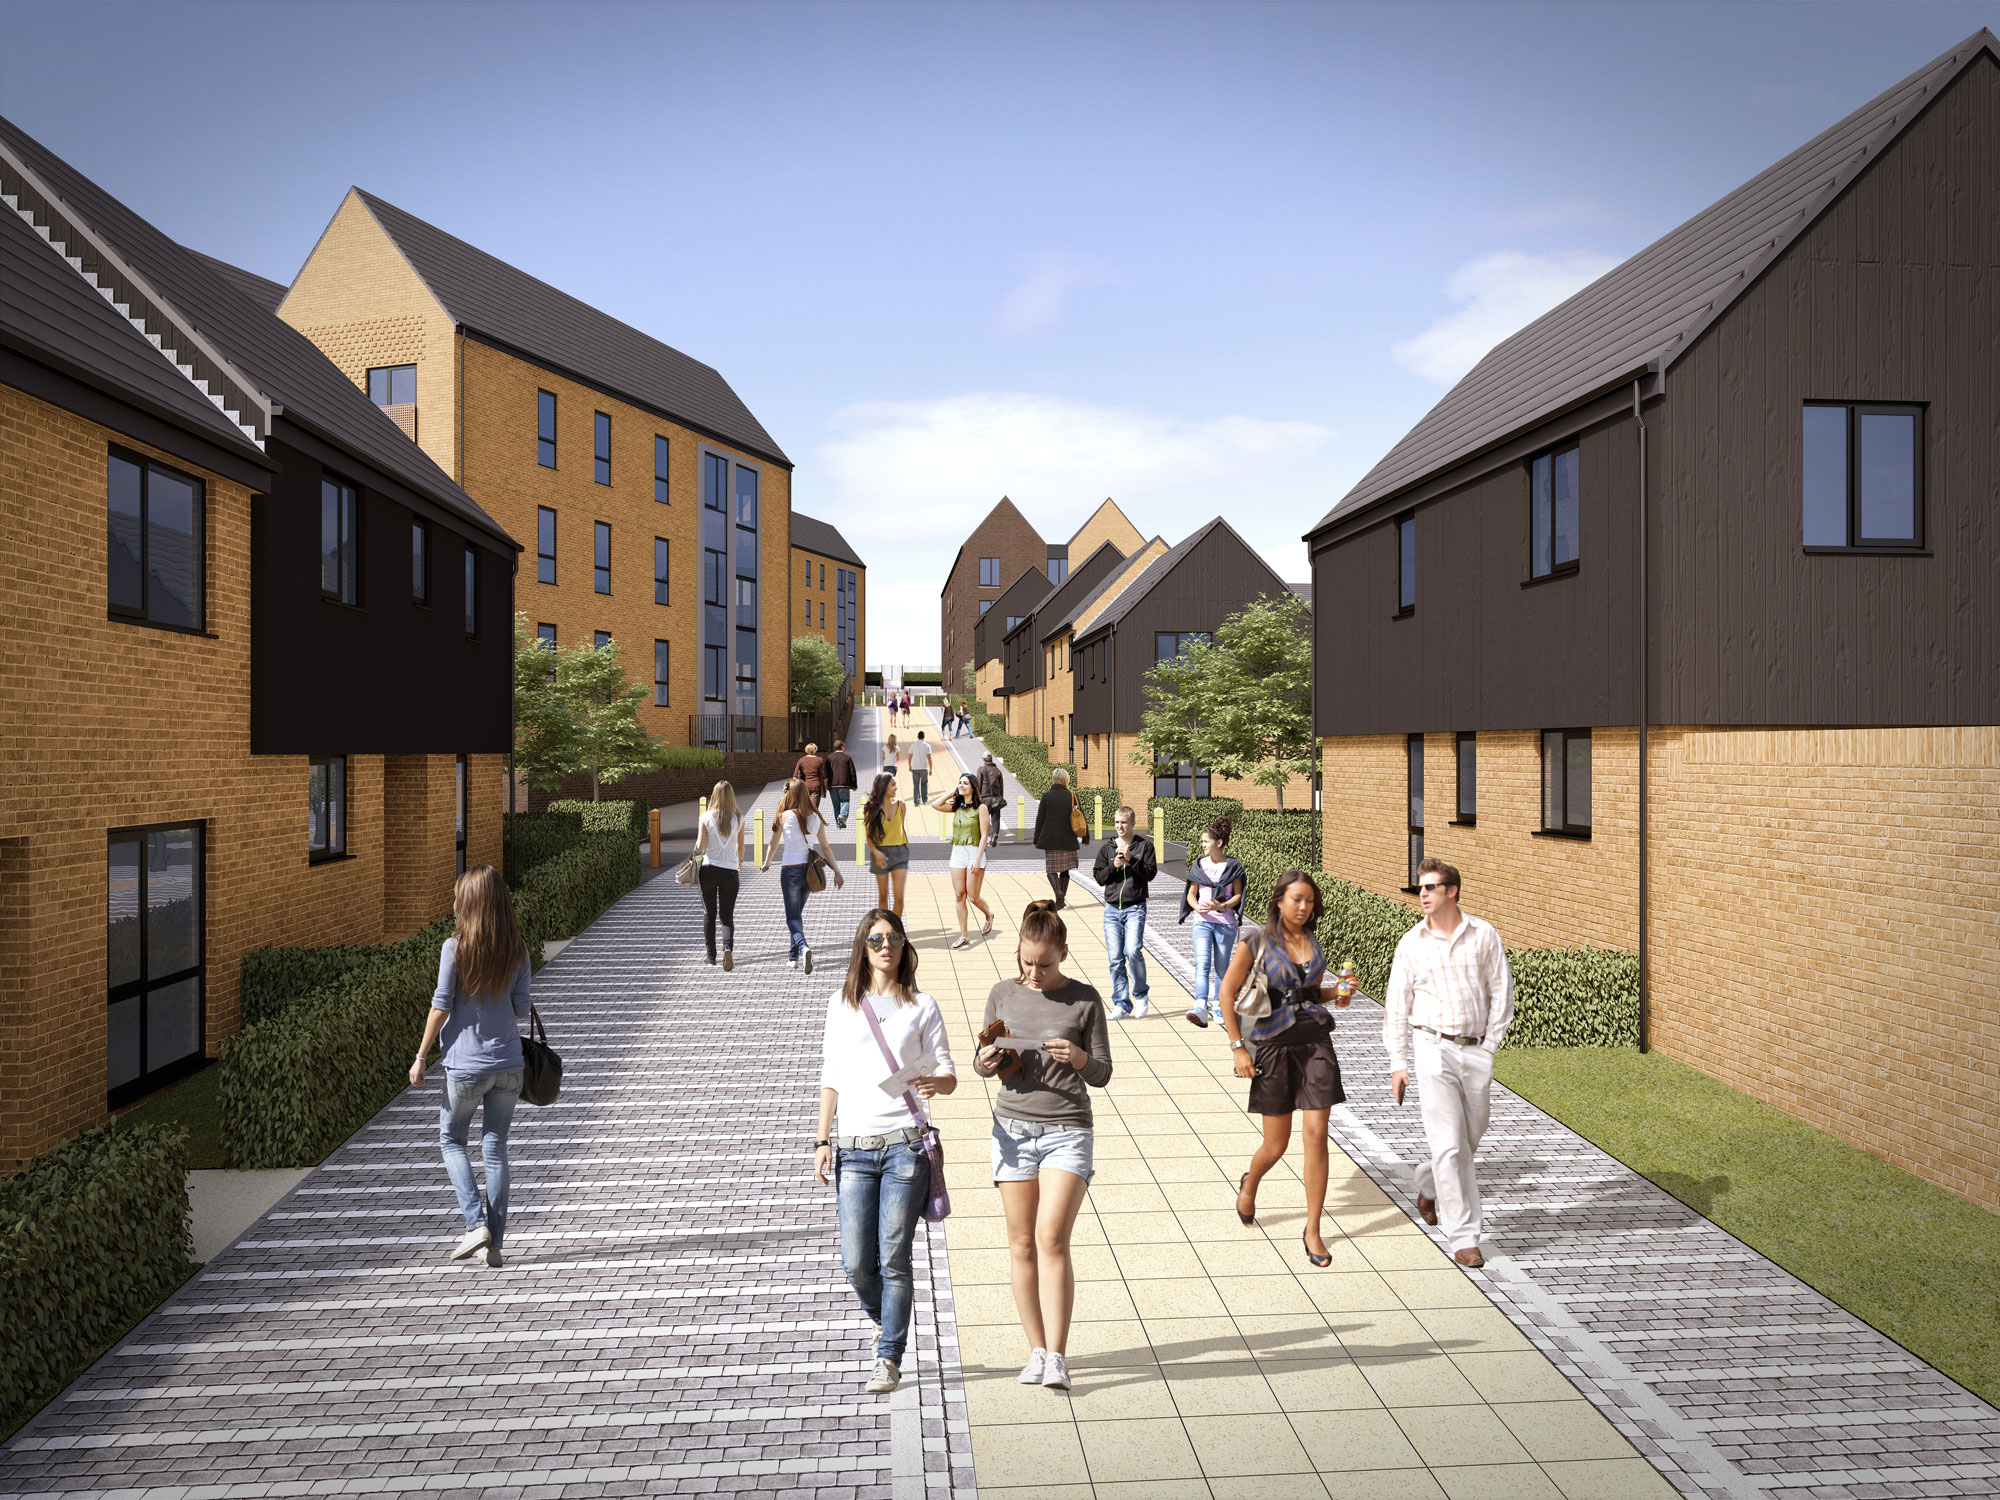 cgi image of a fortior homes development showing people walking on a newly built housing estate